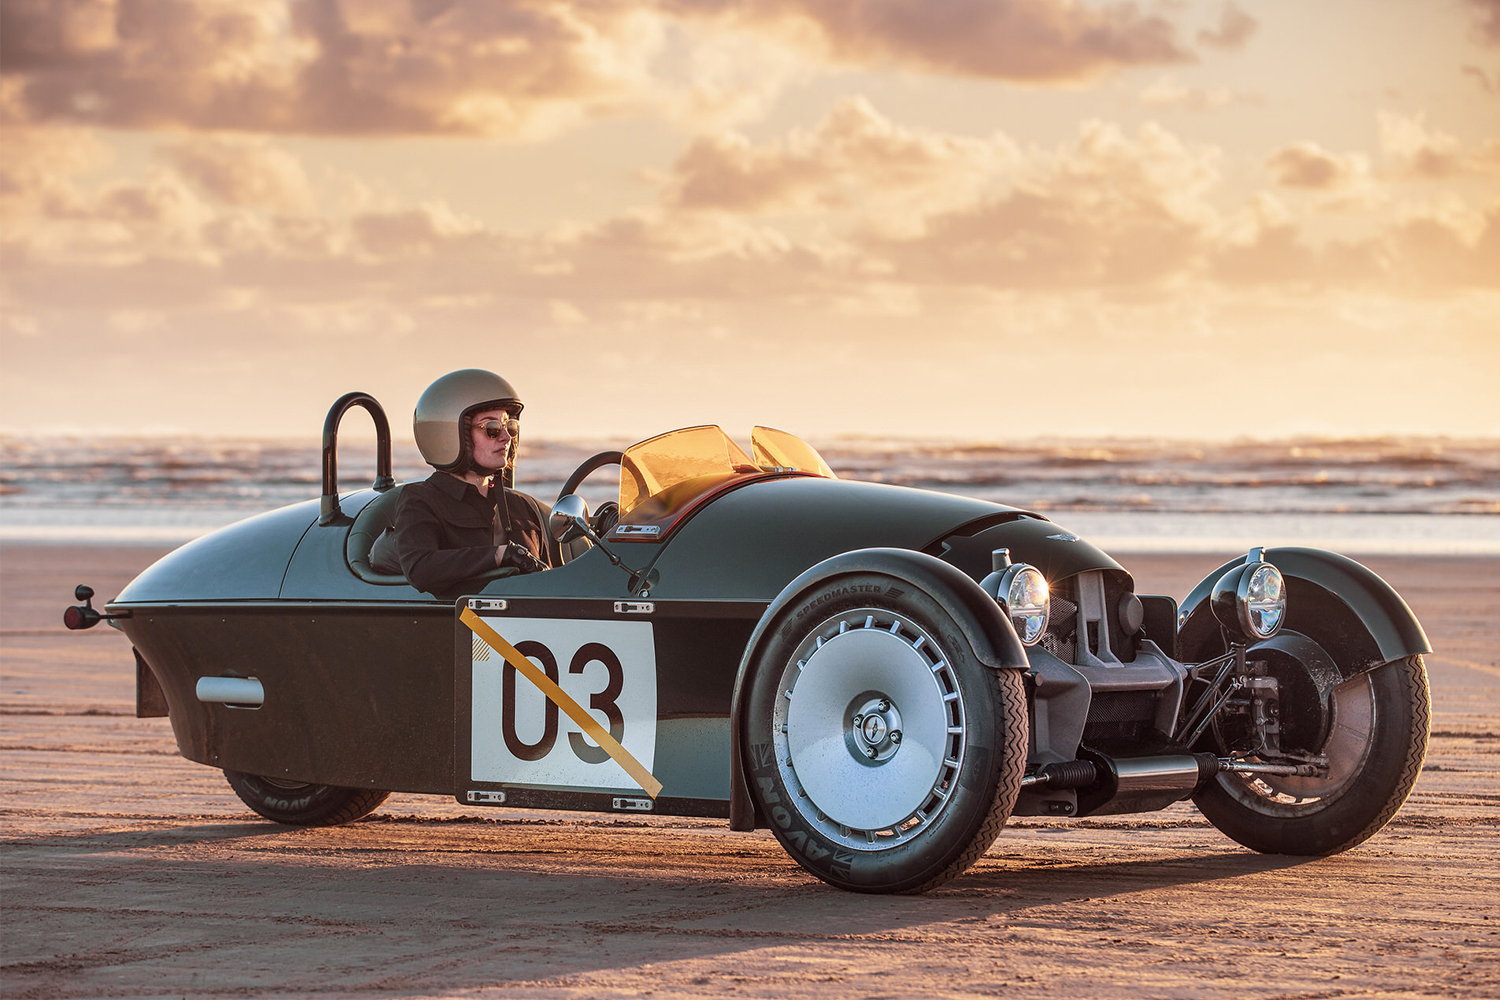 The new Morgan Super 3 in a green livery with the number 03 on the side. A helmeted passenger is seen sitting in the three-wheeled car on the sand.